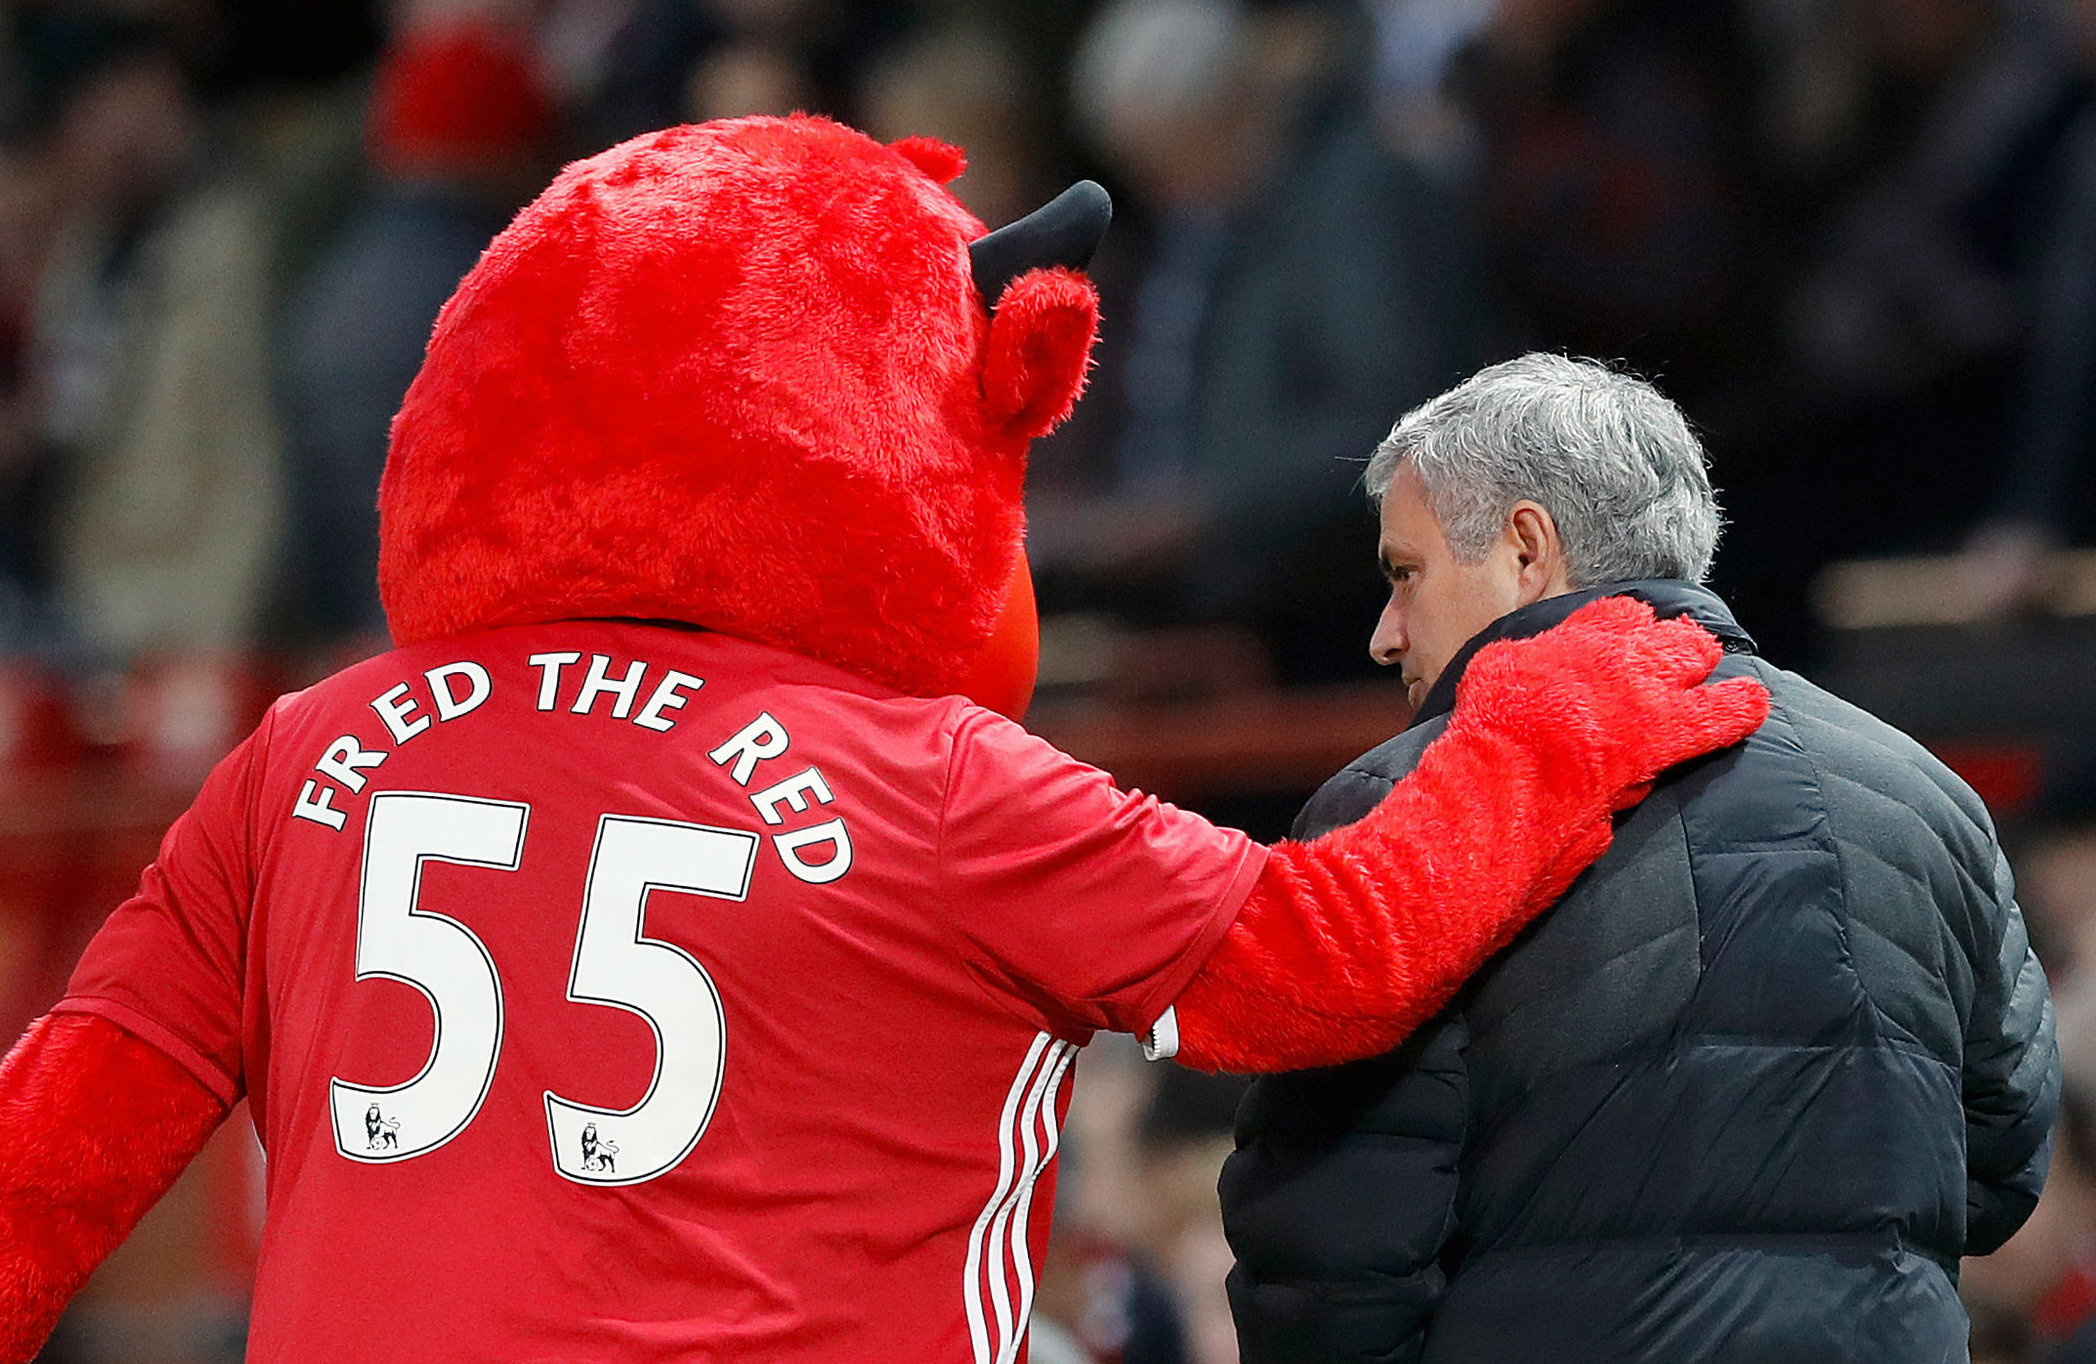 Manchester United mascot Fred The Red talks to manager Jose Mourinho during their English Premier League soccer match against Middlesborough at Old Trafford, Manchester, England, Saturday, Dec. 31, 2016, AP